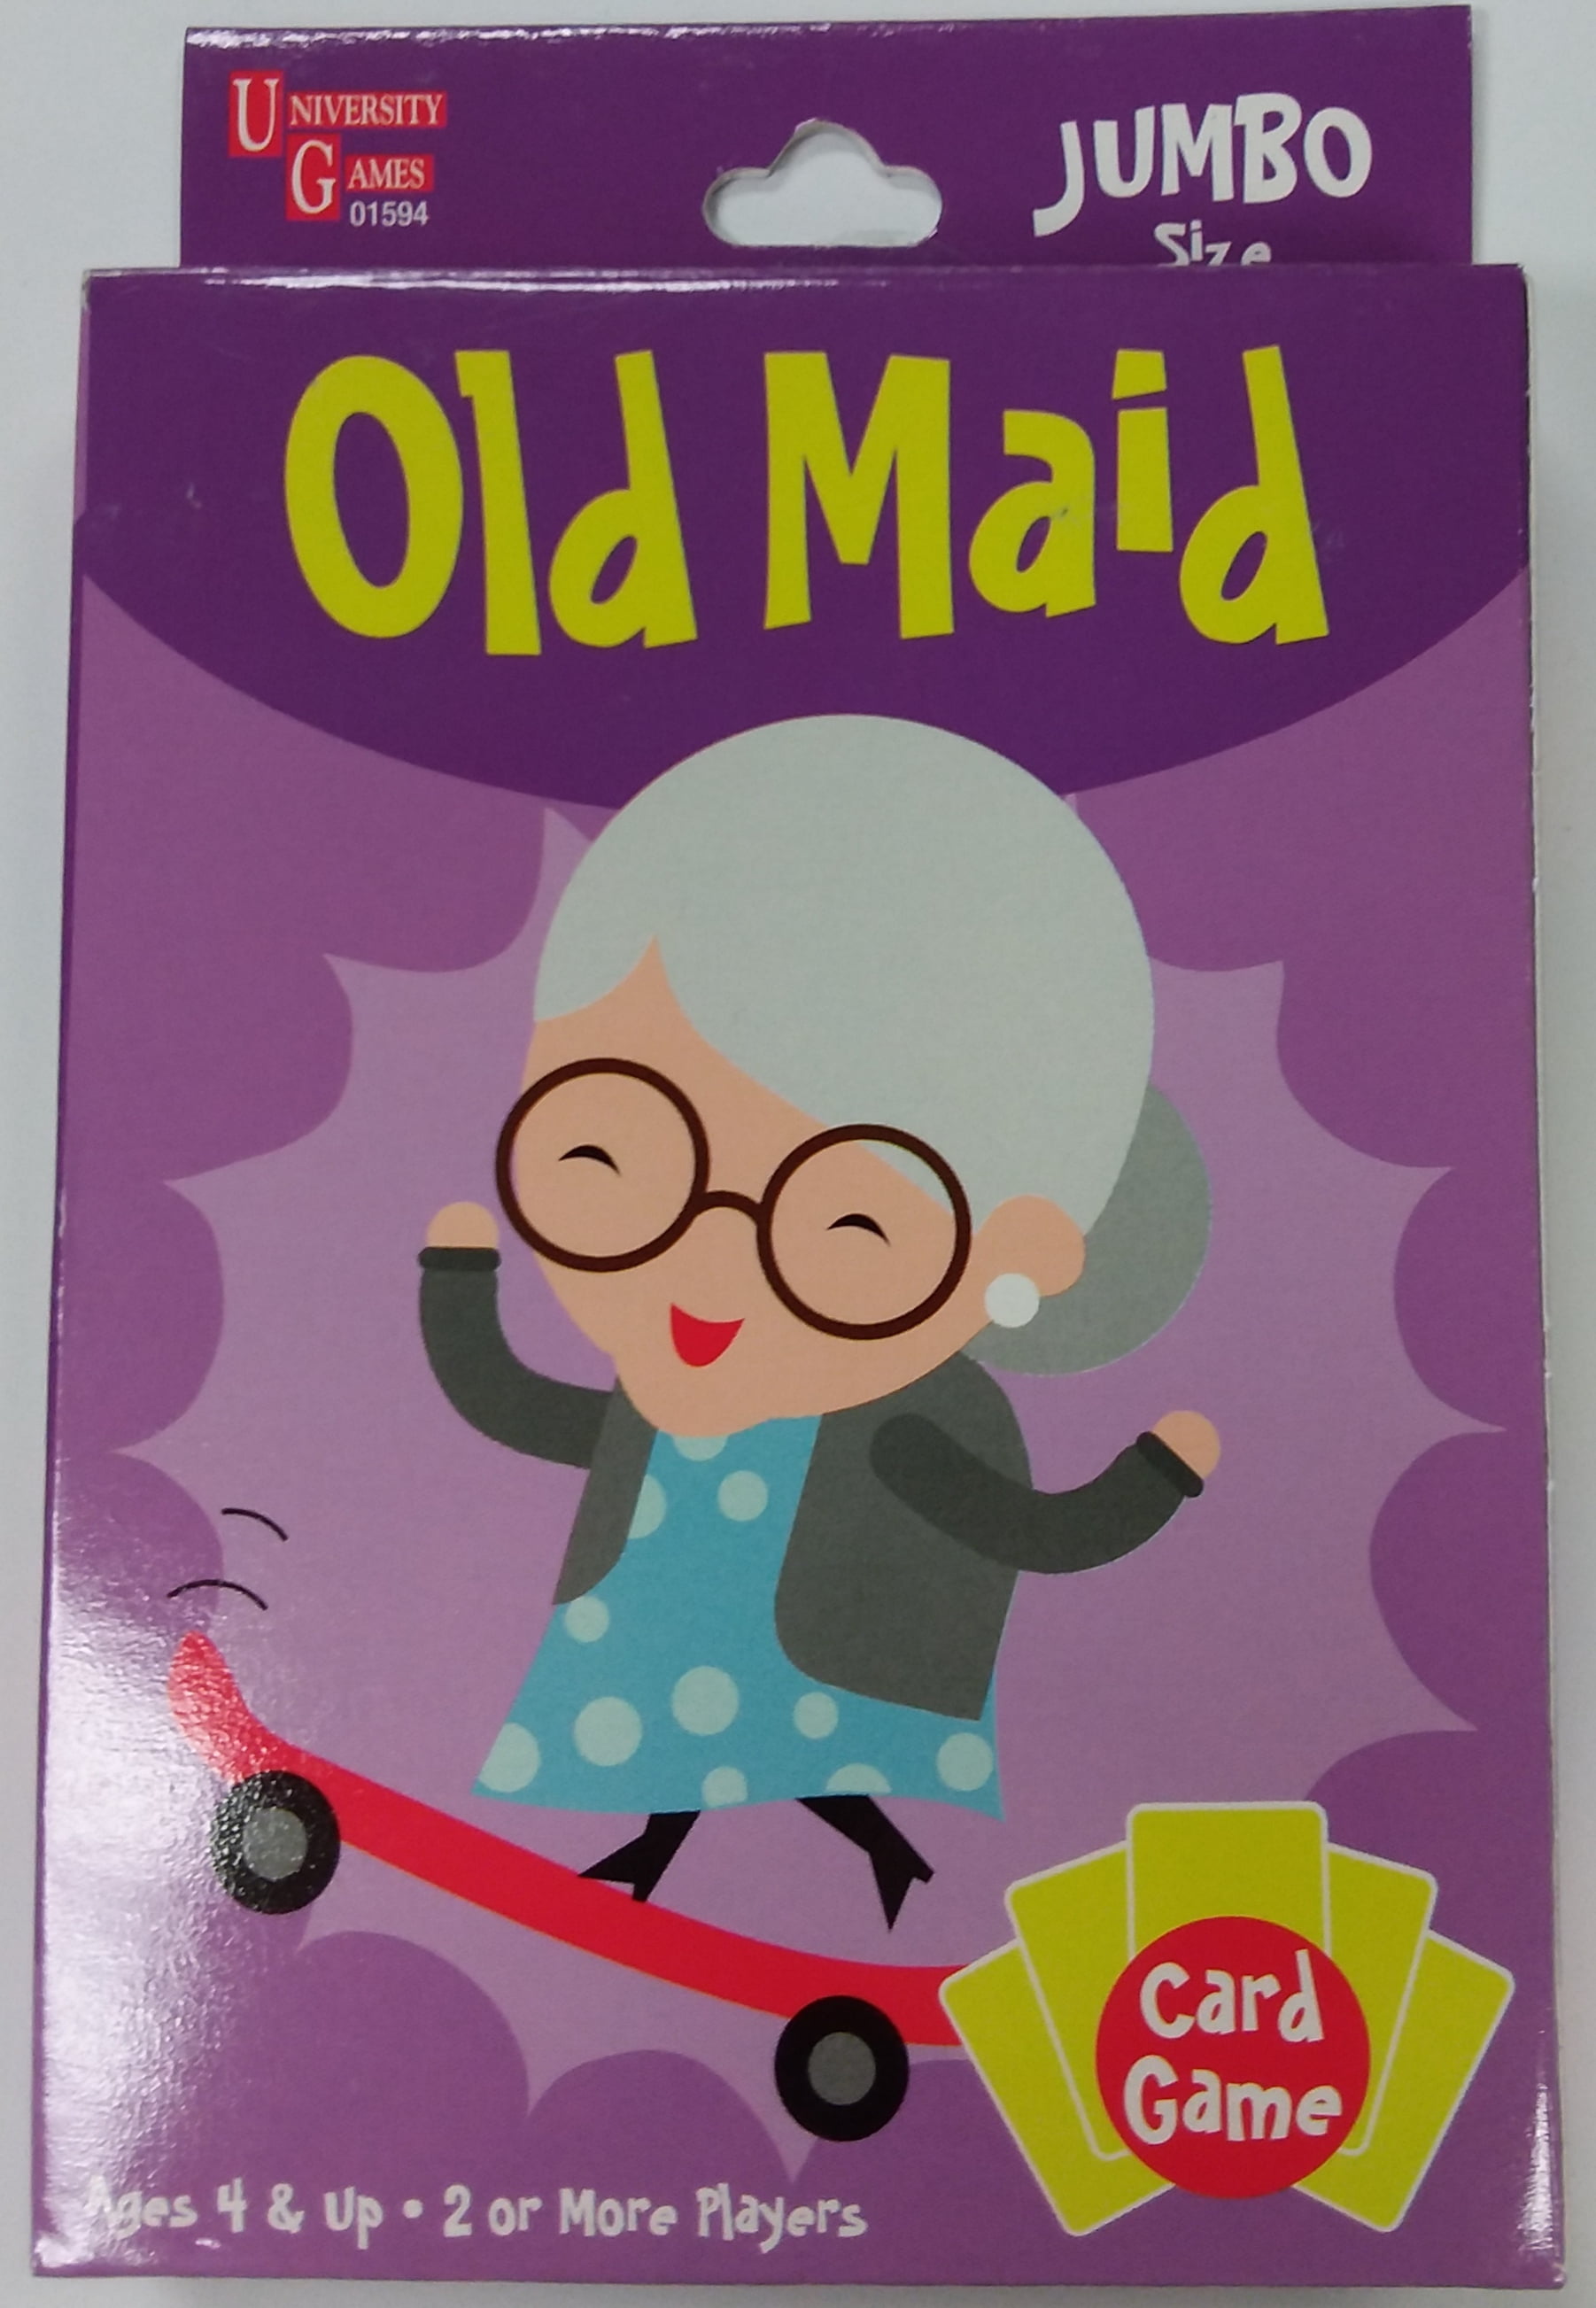 old maids card